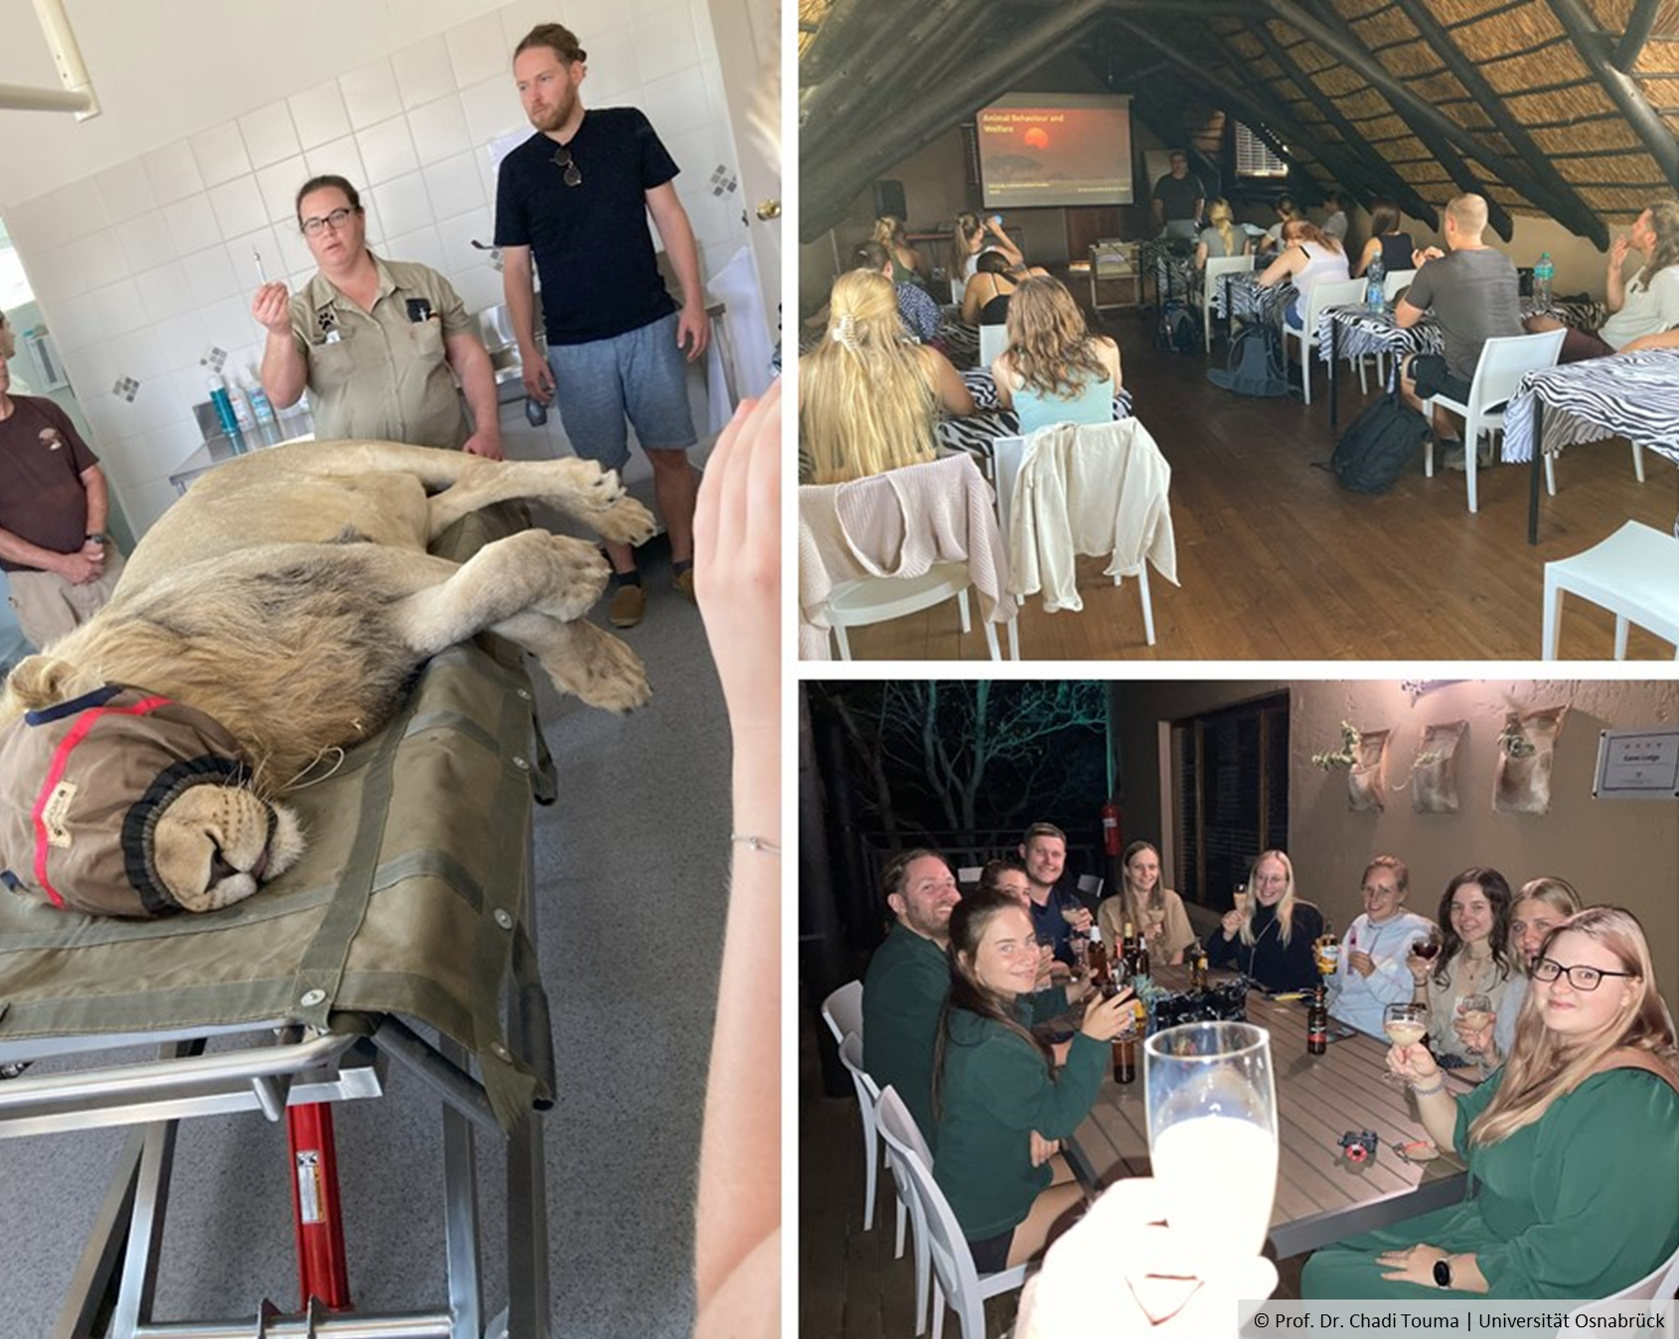 three images combined; image 1: Behind a sleeping lion stands a person with a syringe in his hand; image 2: Seated people listening to a lecture; image 3: A group of people with drinks in their hands smile at the camera;